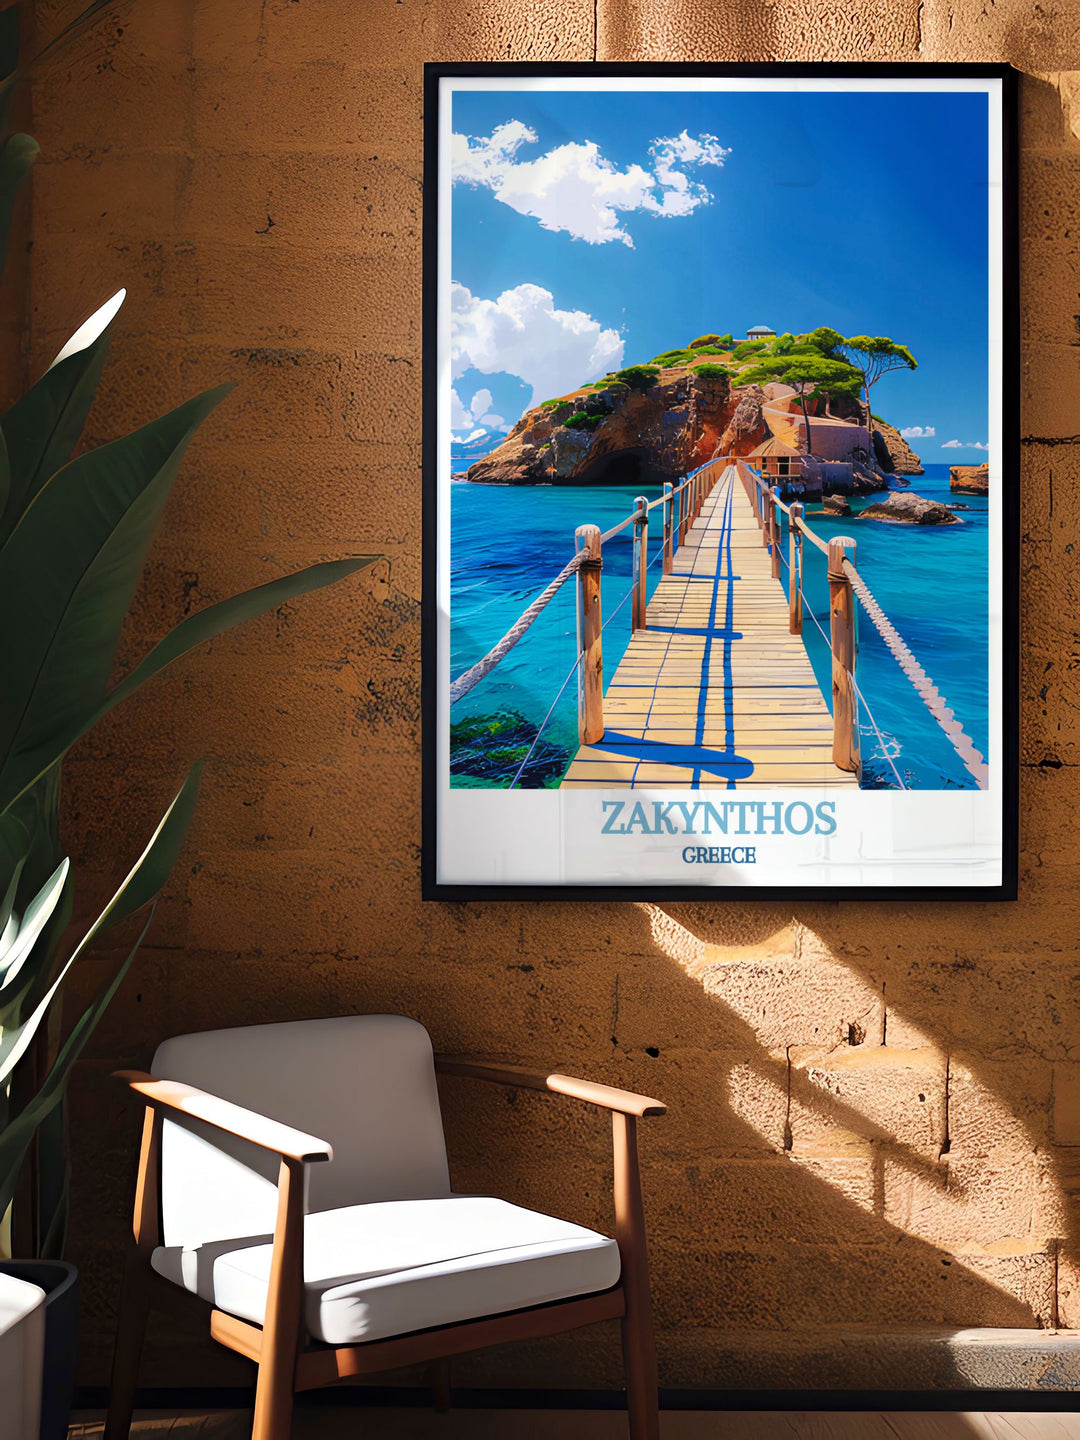 Zakynthos Poster featuring the picturesque scenery of Cameo Island and the lively streets of Zakynthos Town, ideal for those seeking Greece Island Art to adorn their walls.